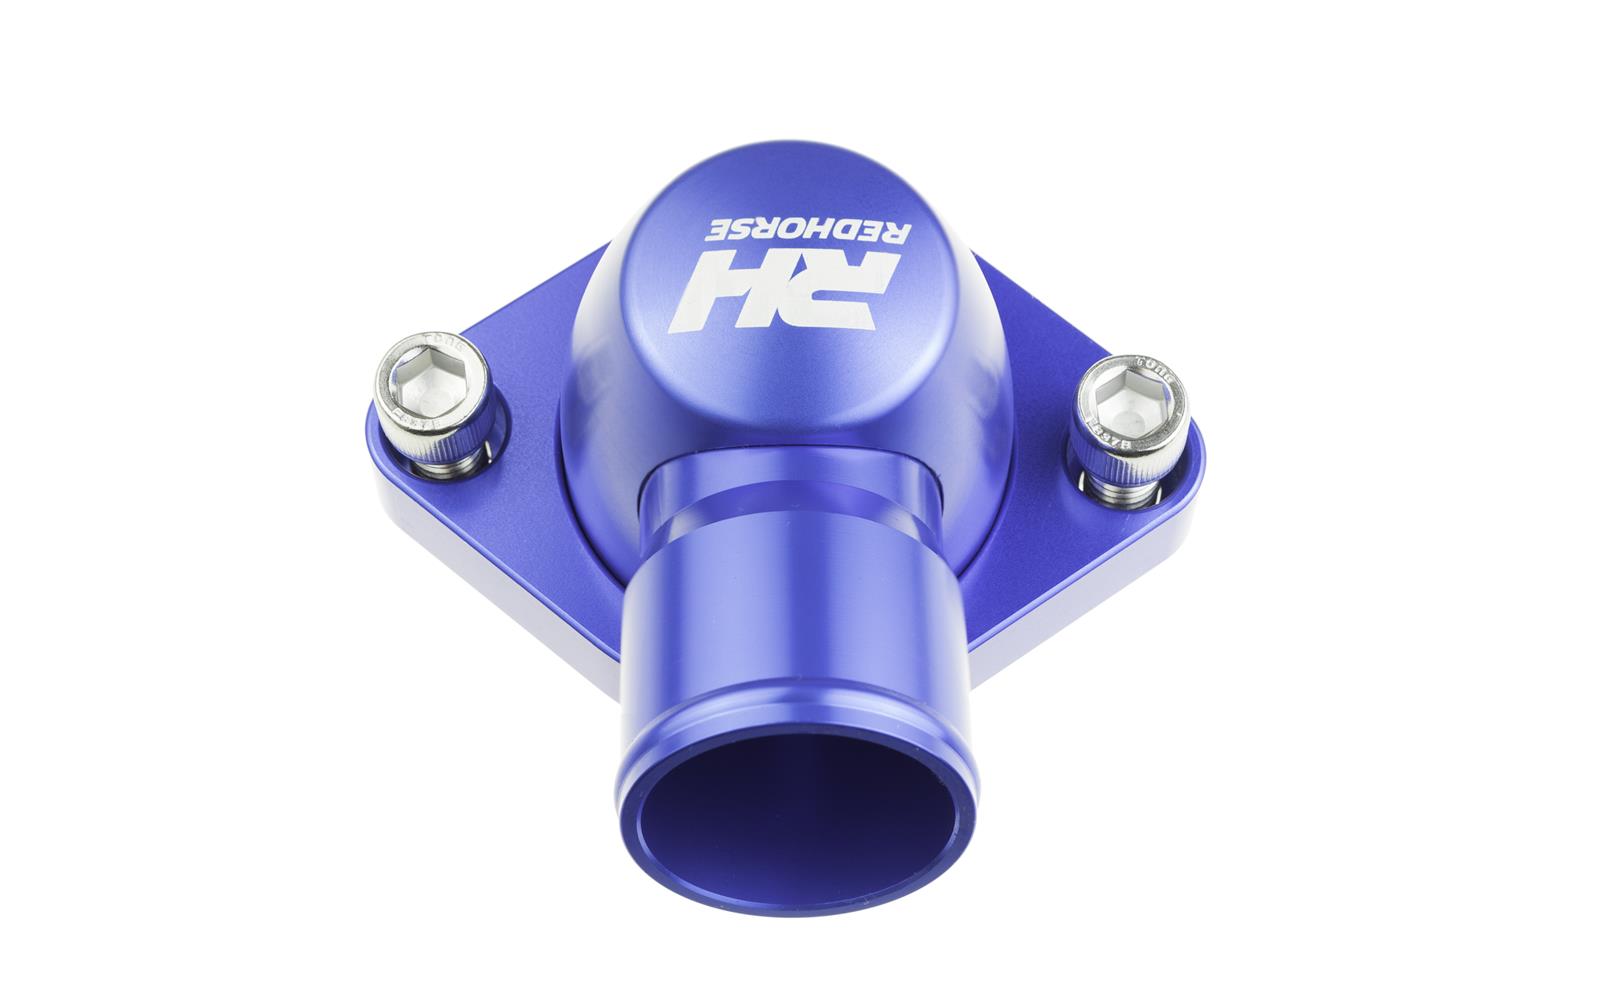 Redhorse Performance 4910-350-20-1 Aluminum Water Neck 1.25in Hose for Chevy V8 All ENGINE - Blue